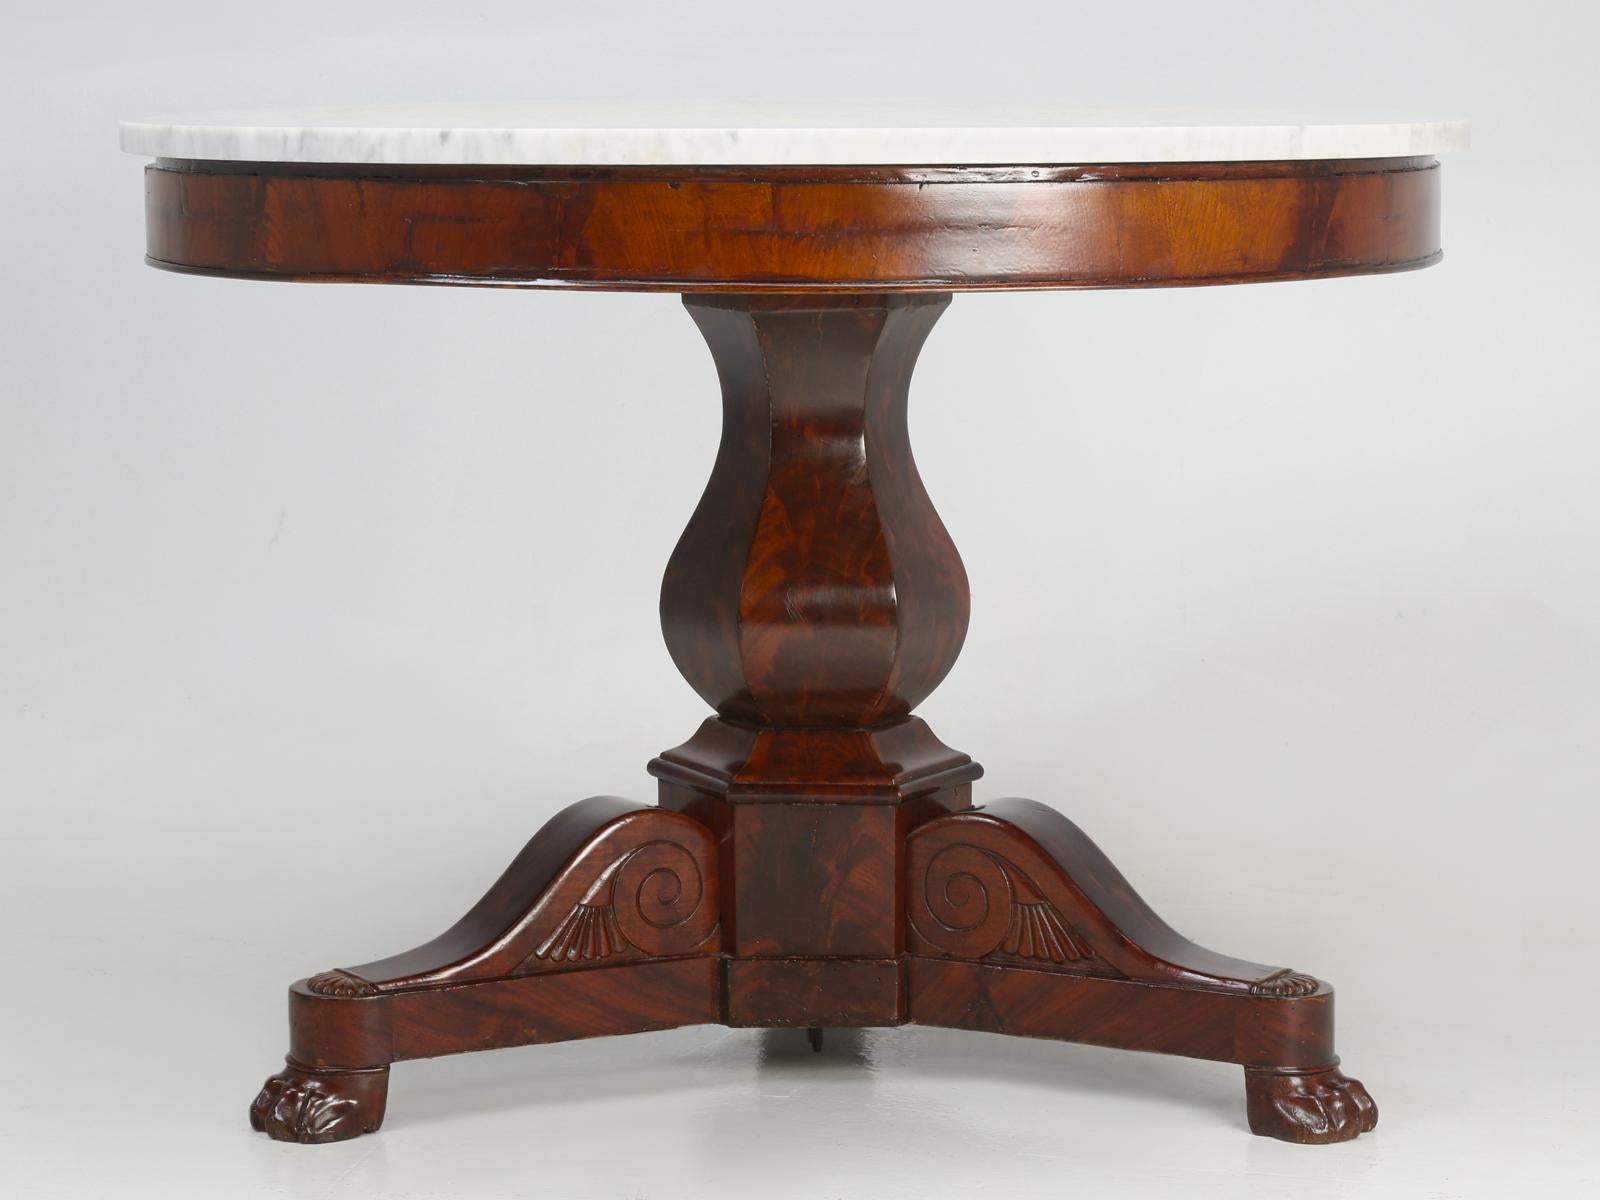 Antique French Mahogany and Marble Center Hall Table or Side Table, Restored 1